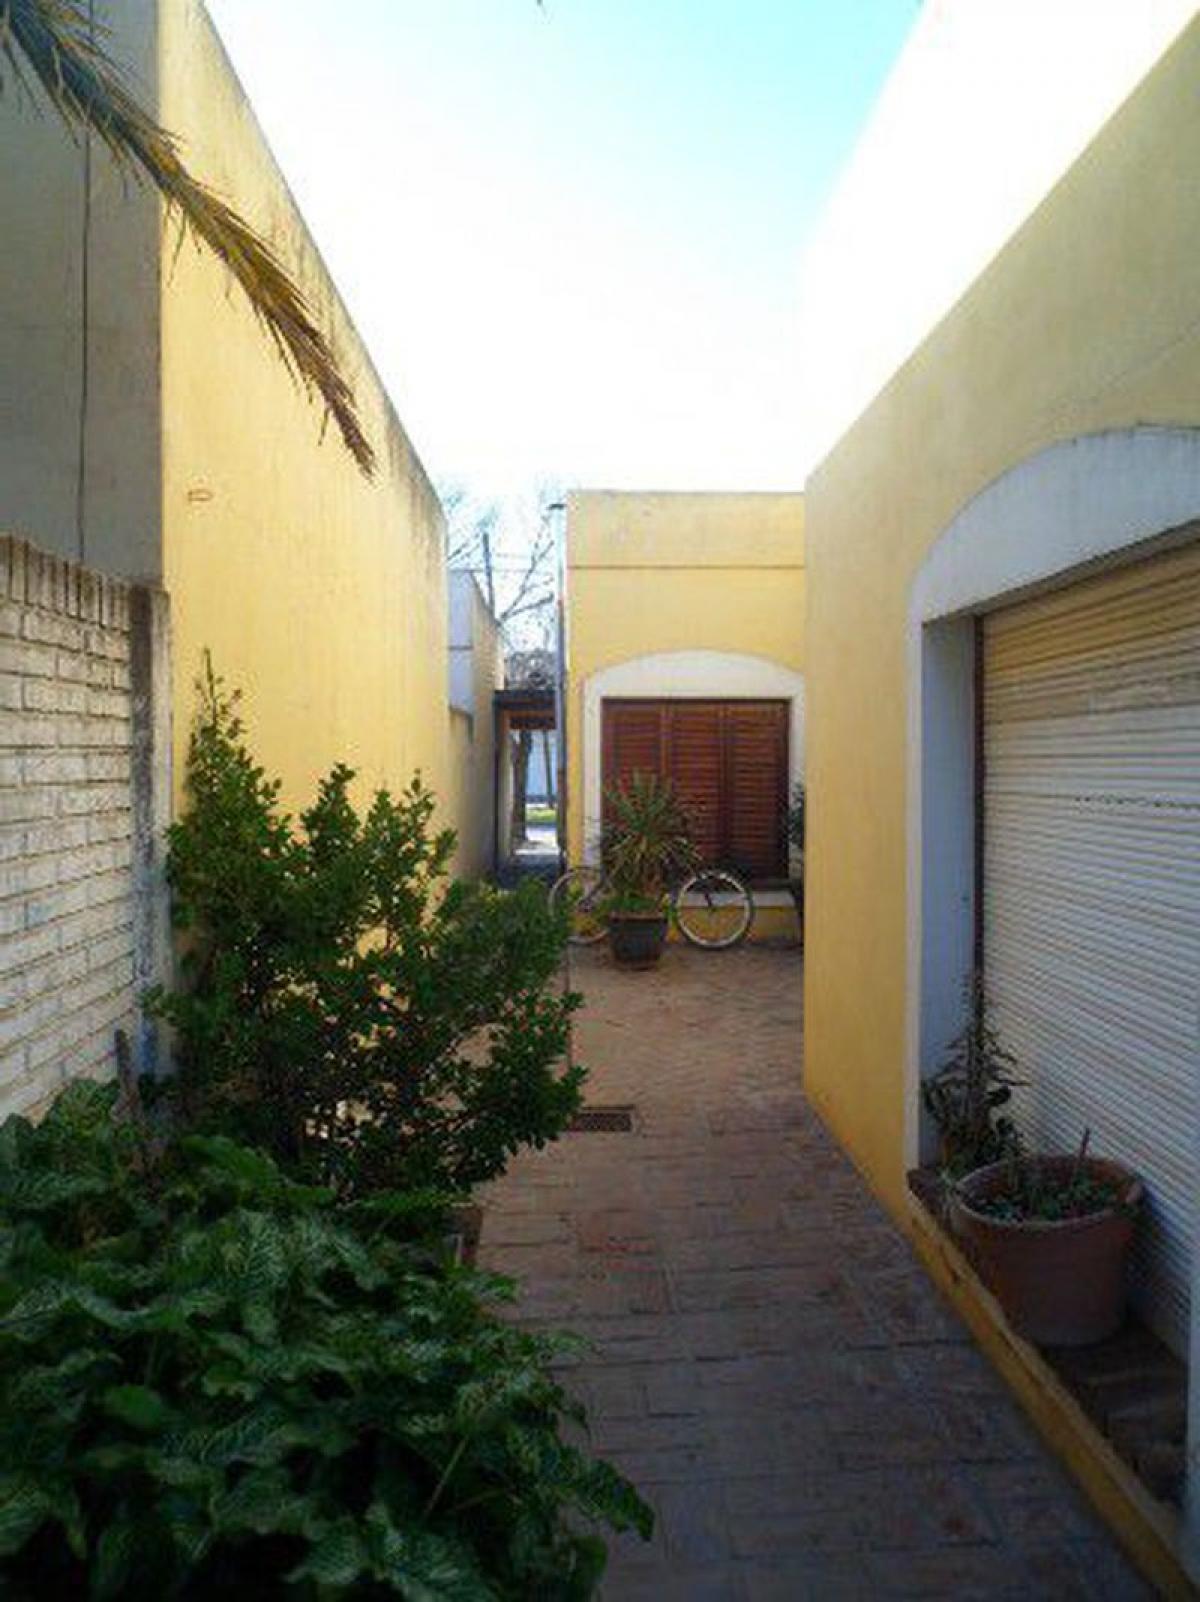 Picture of Home For Sale in Coronel Suarez, Buenos Aires, Argentina